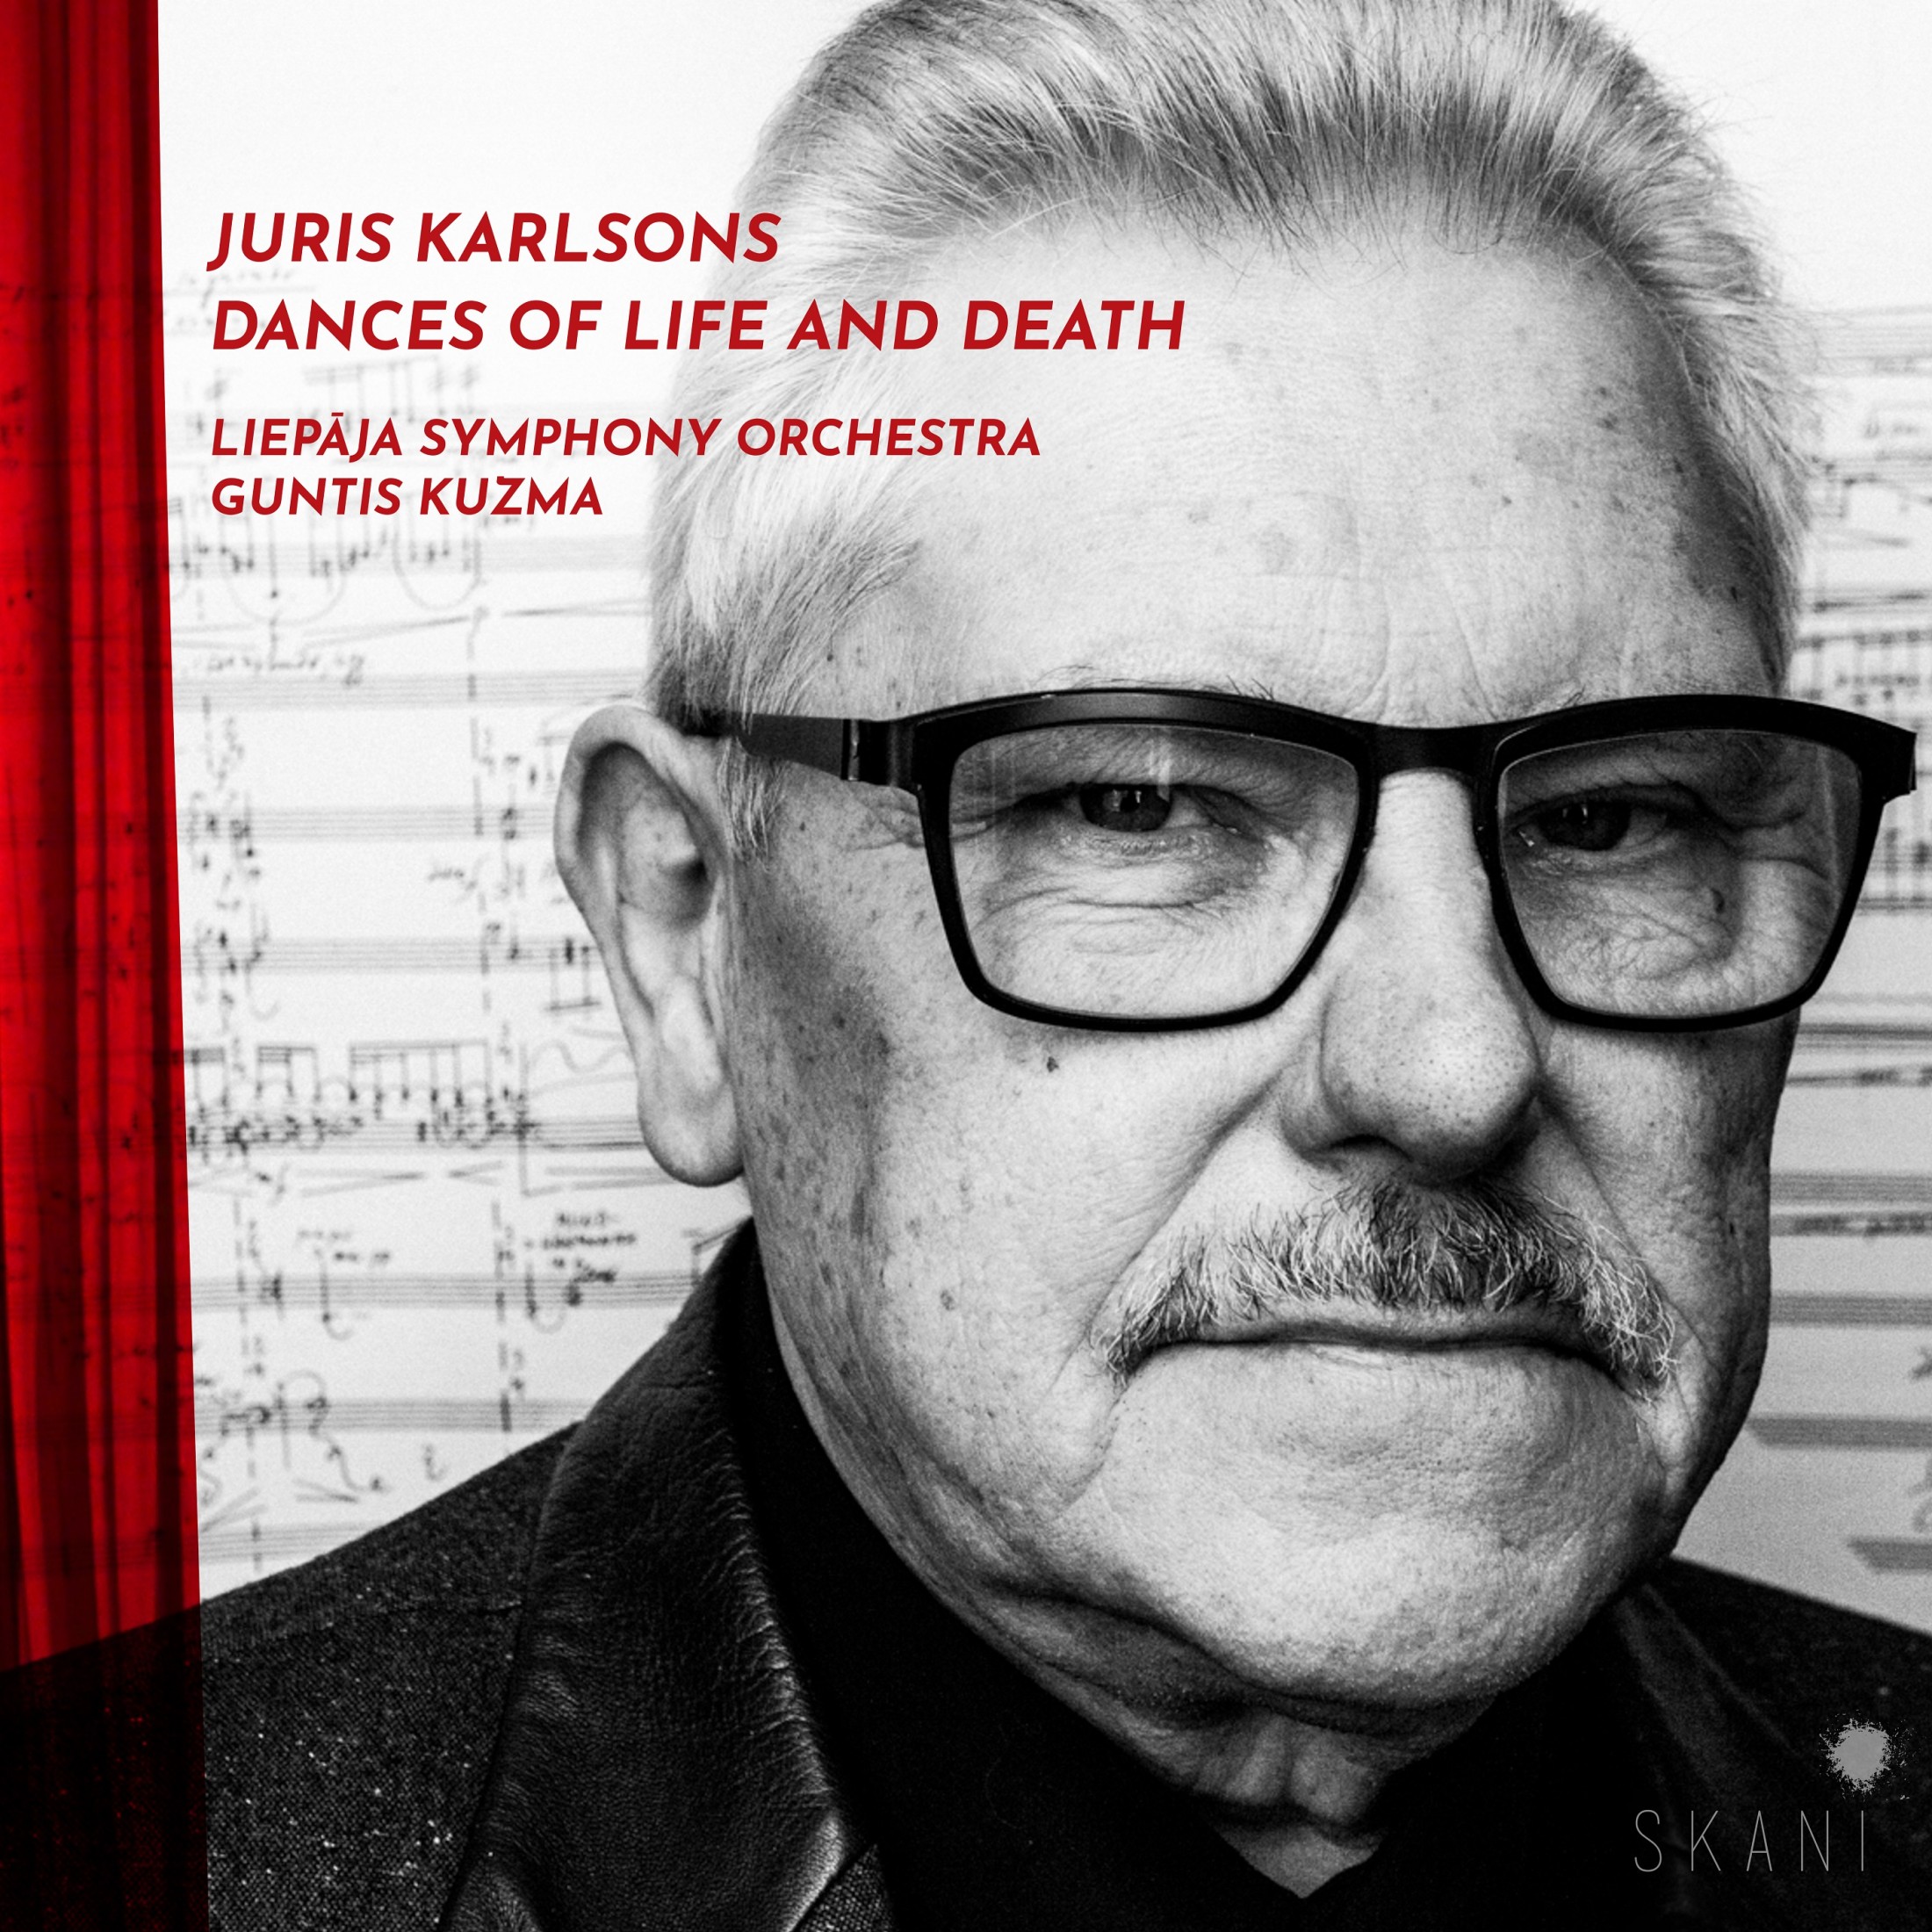 Juris Karlsons: Dances of Life and Death